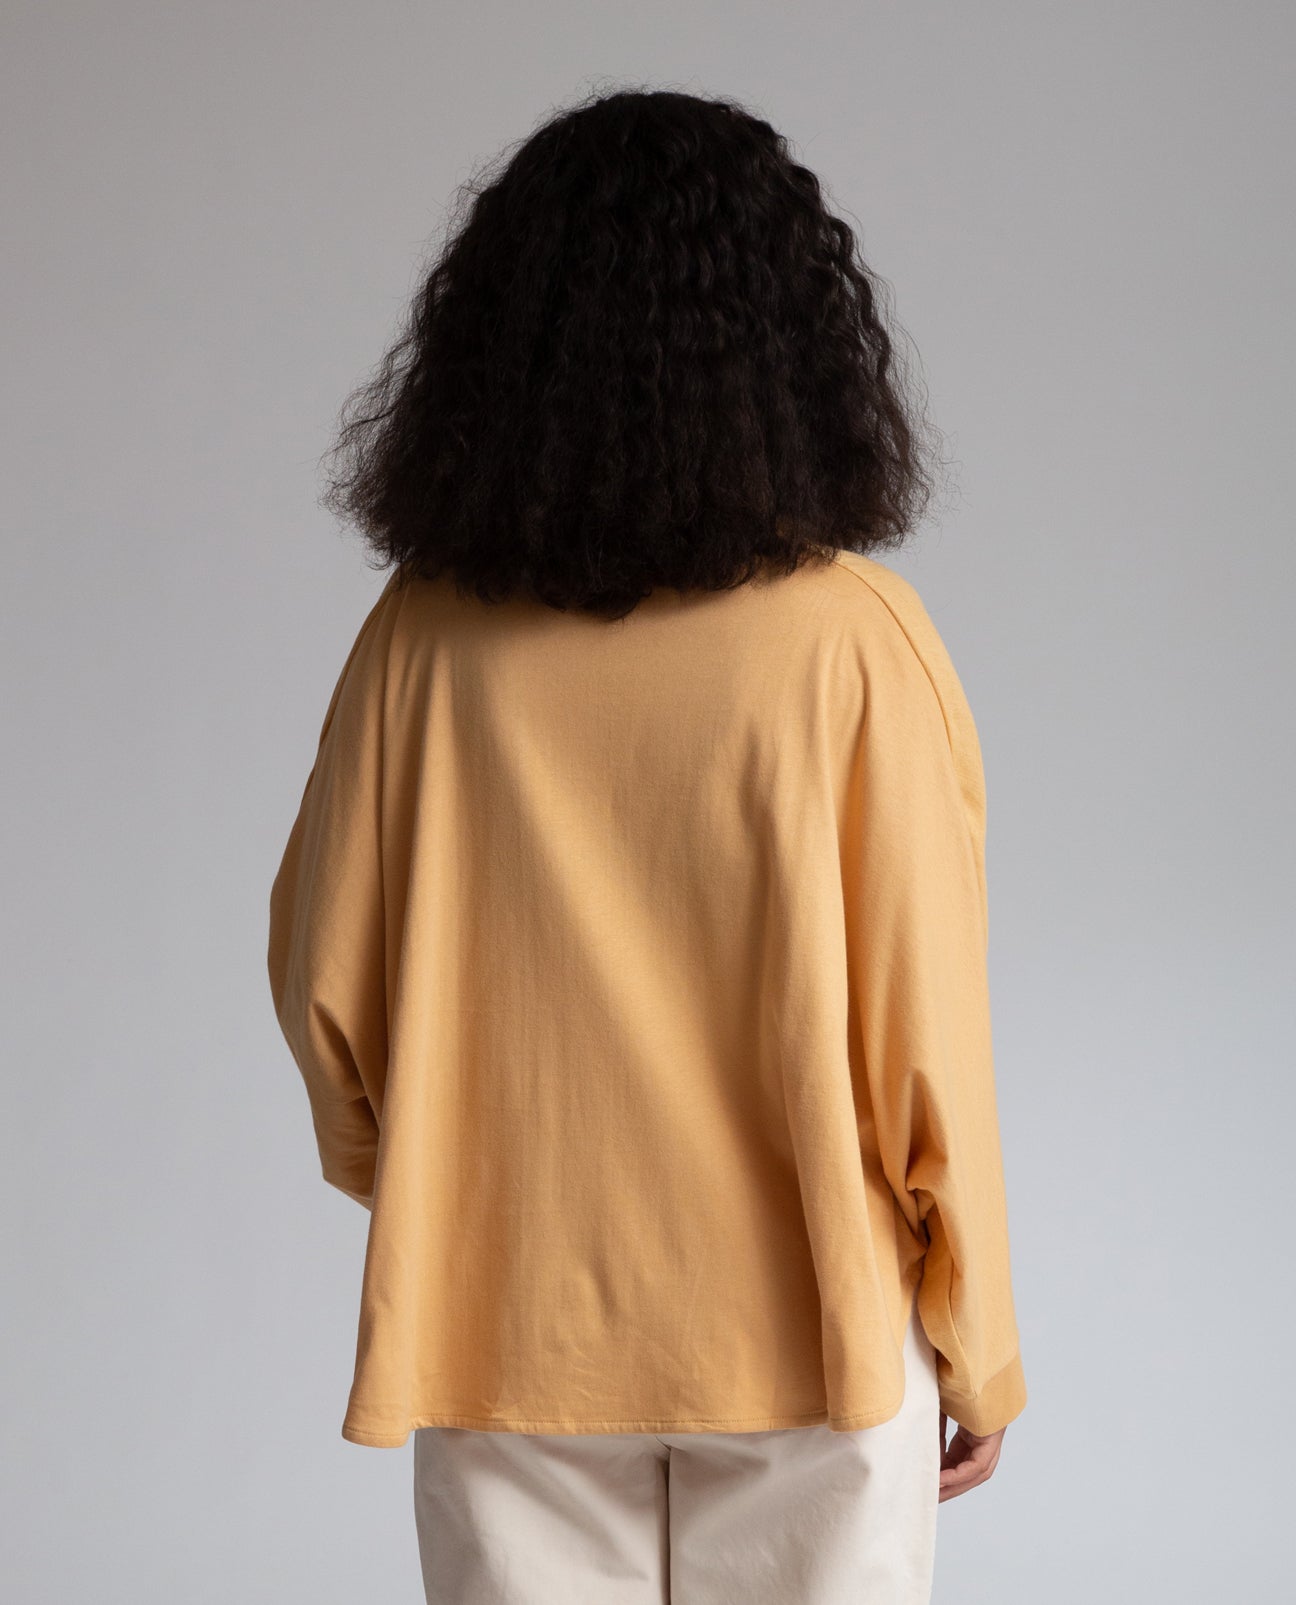 Ximena-May Organic Cotton & Linen Blouse In Sunflower